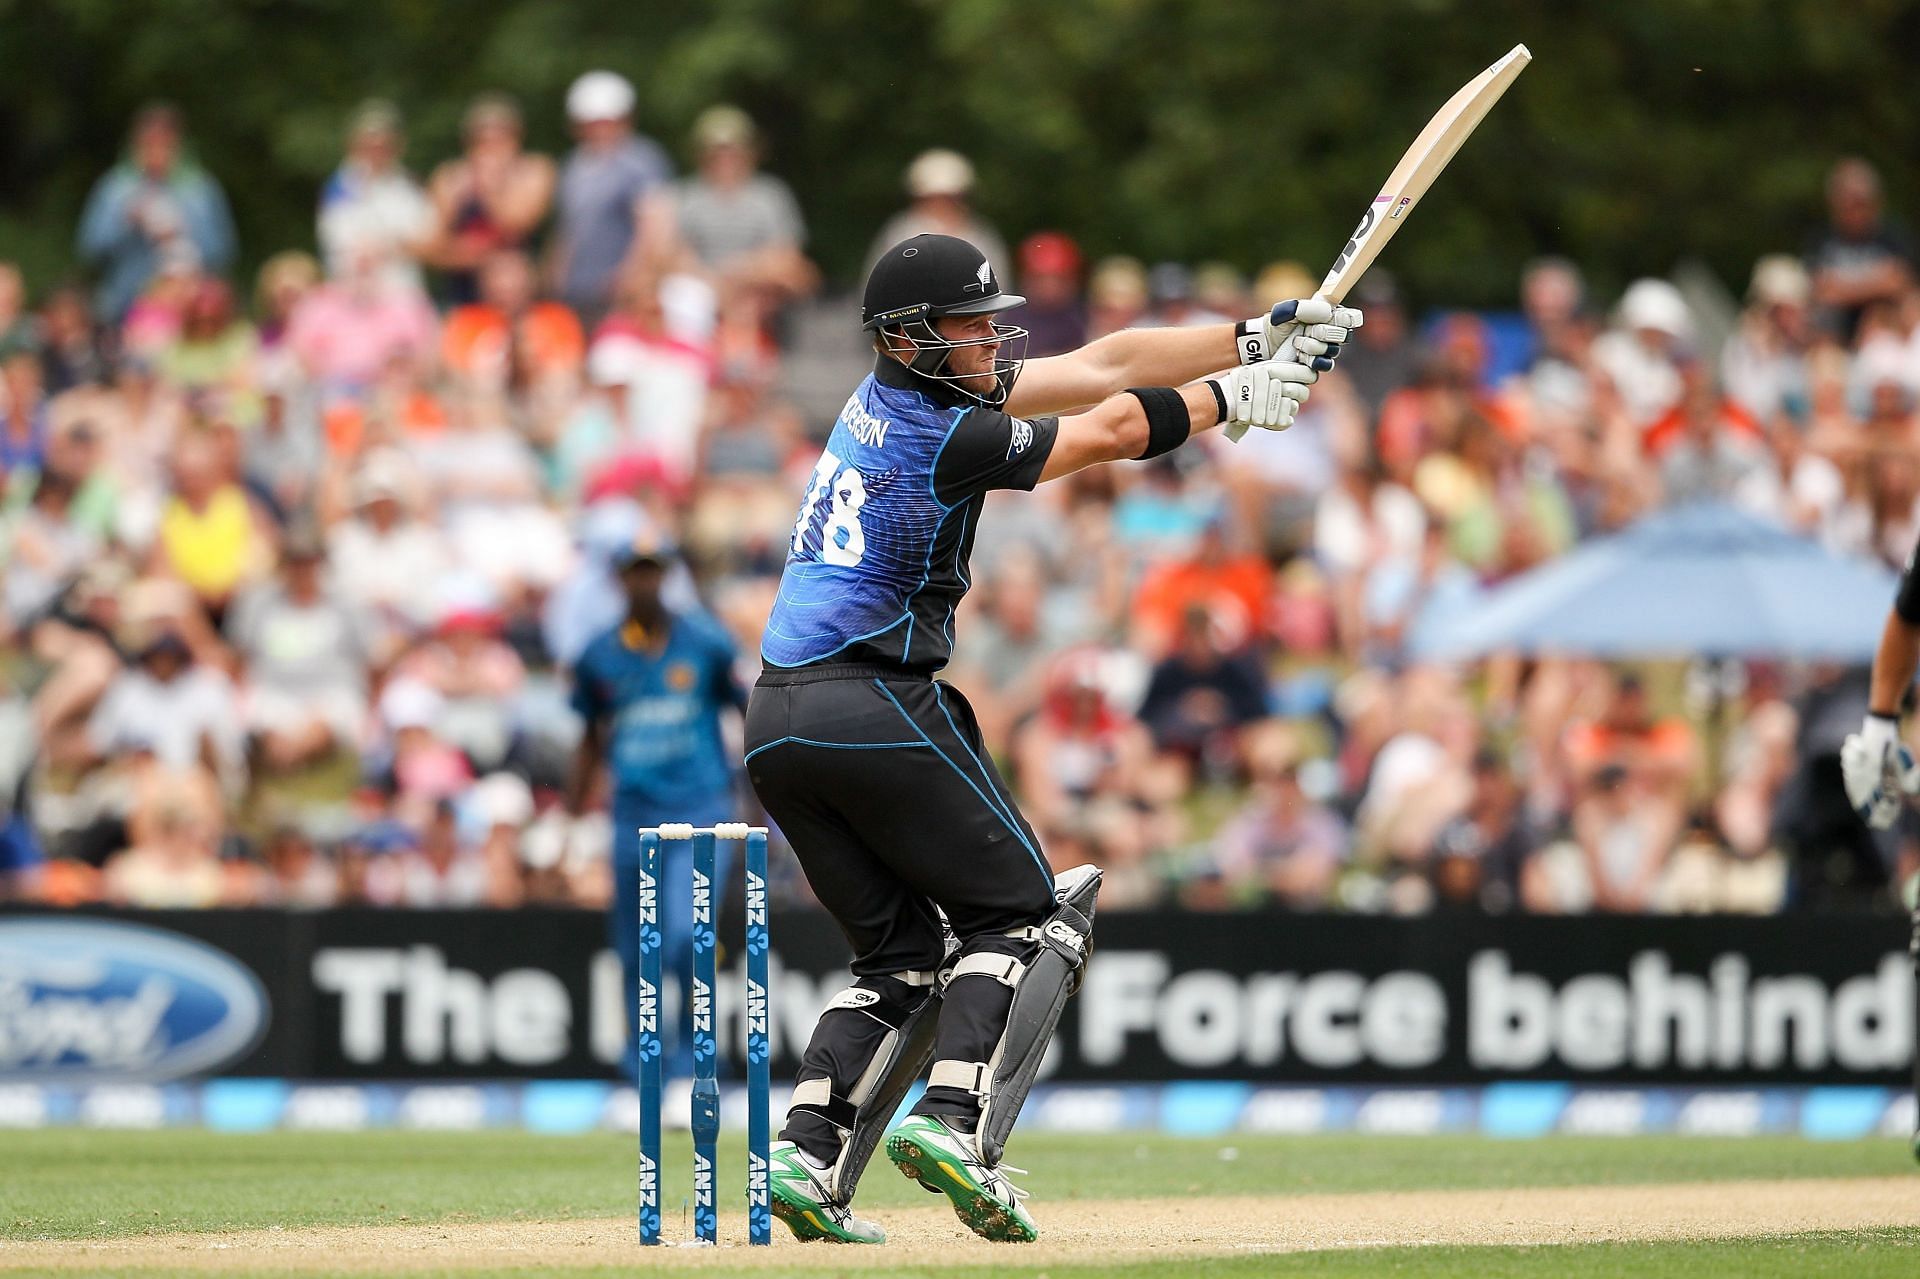 Corey Anderson in action during the New Zealand v Sri Lanka series